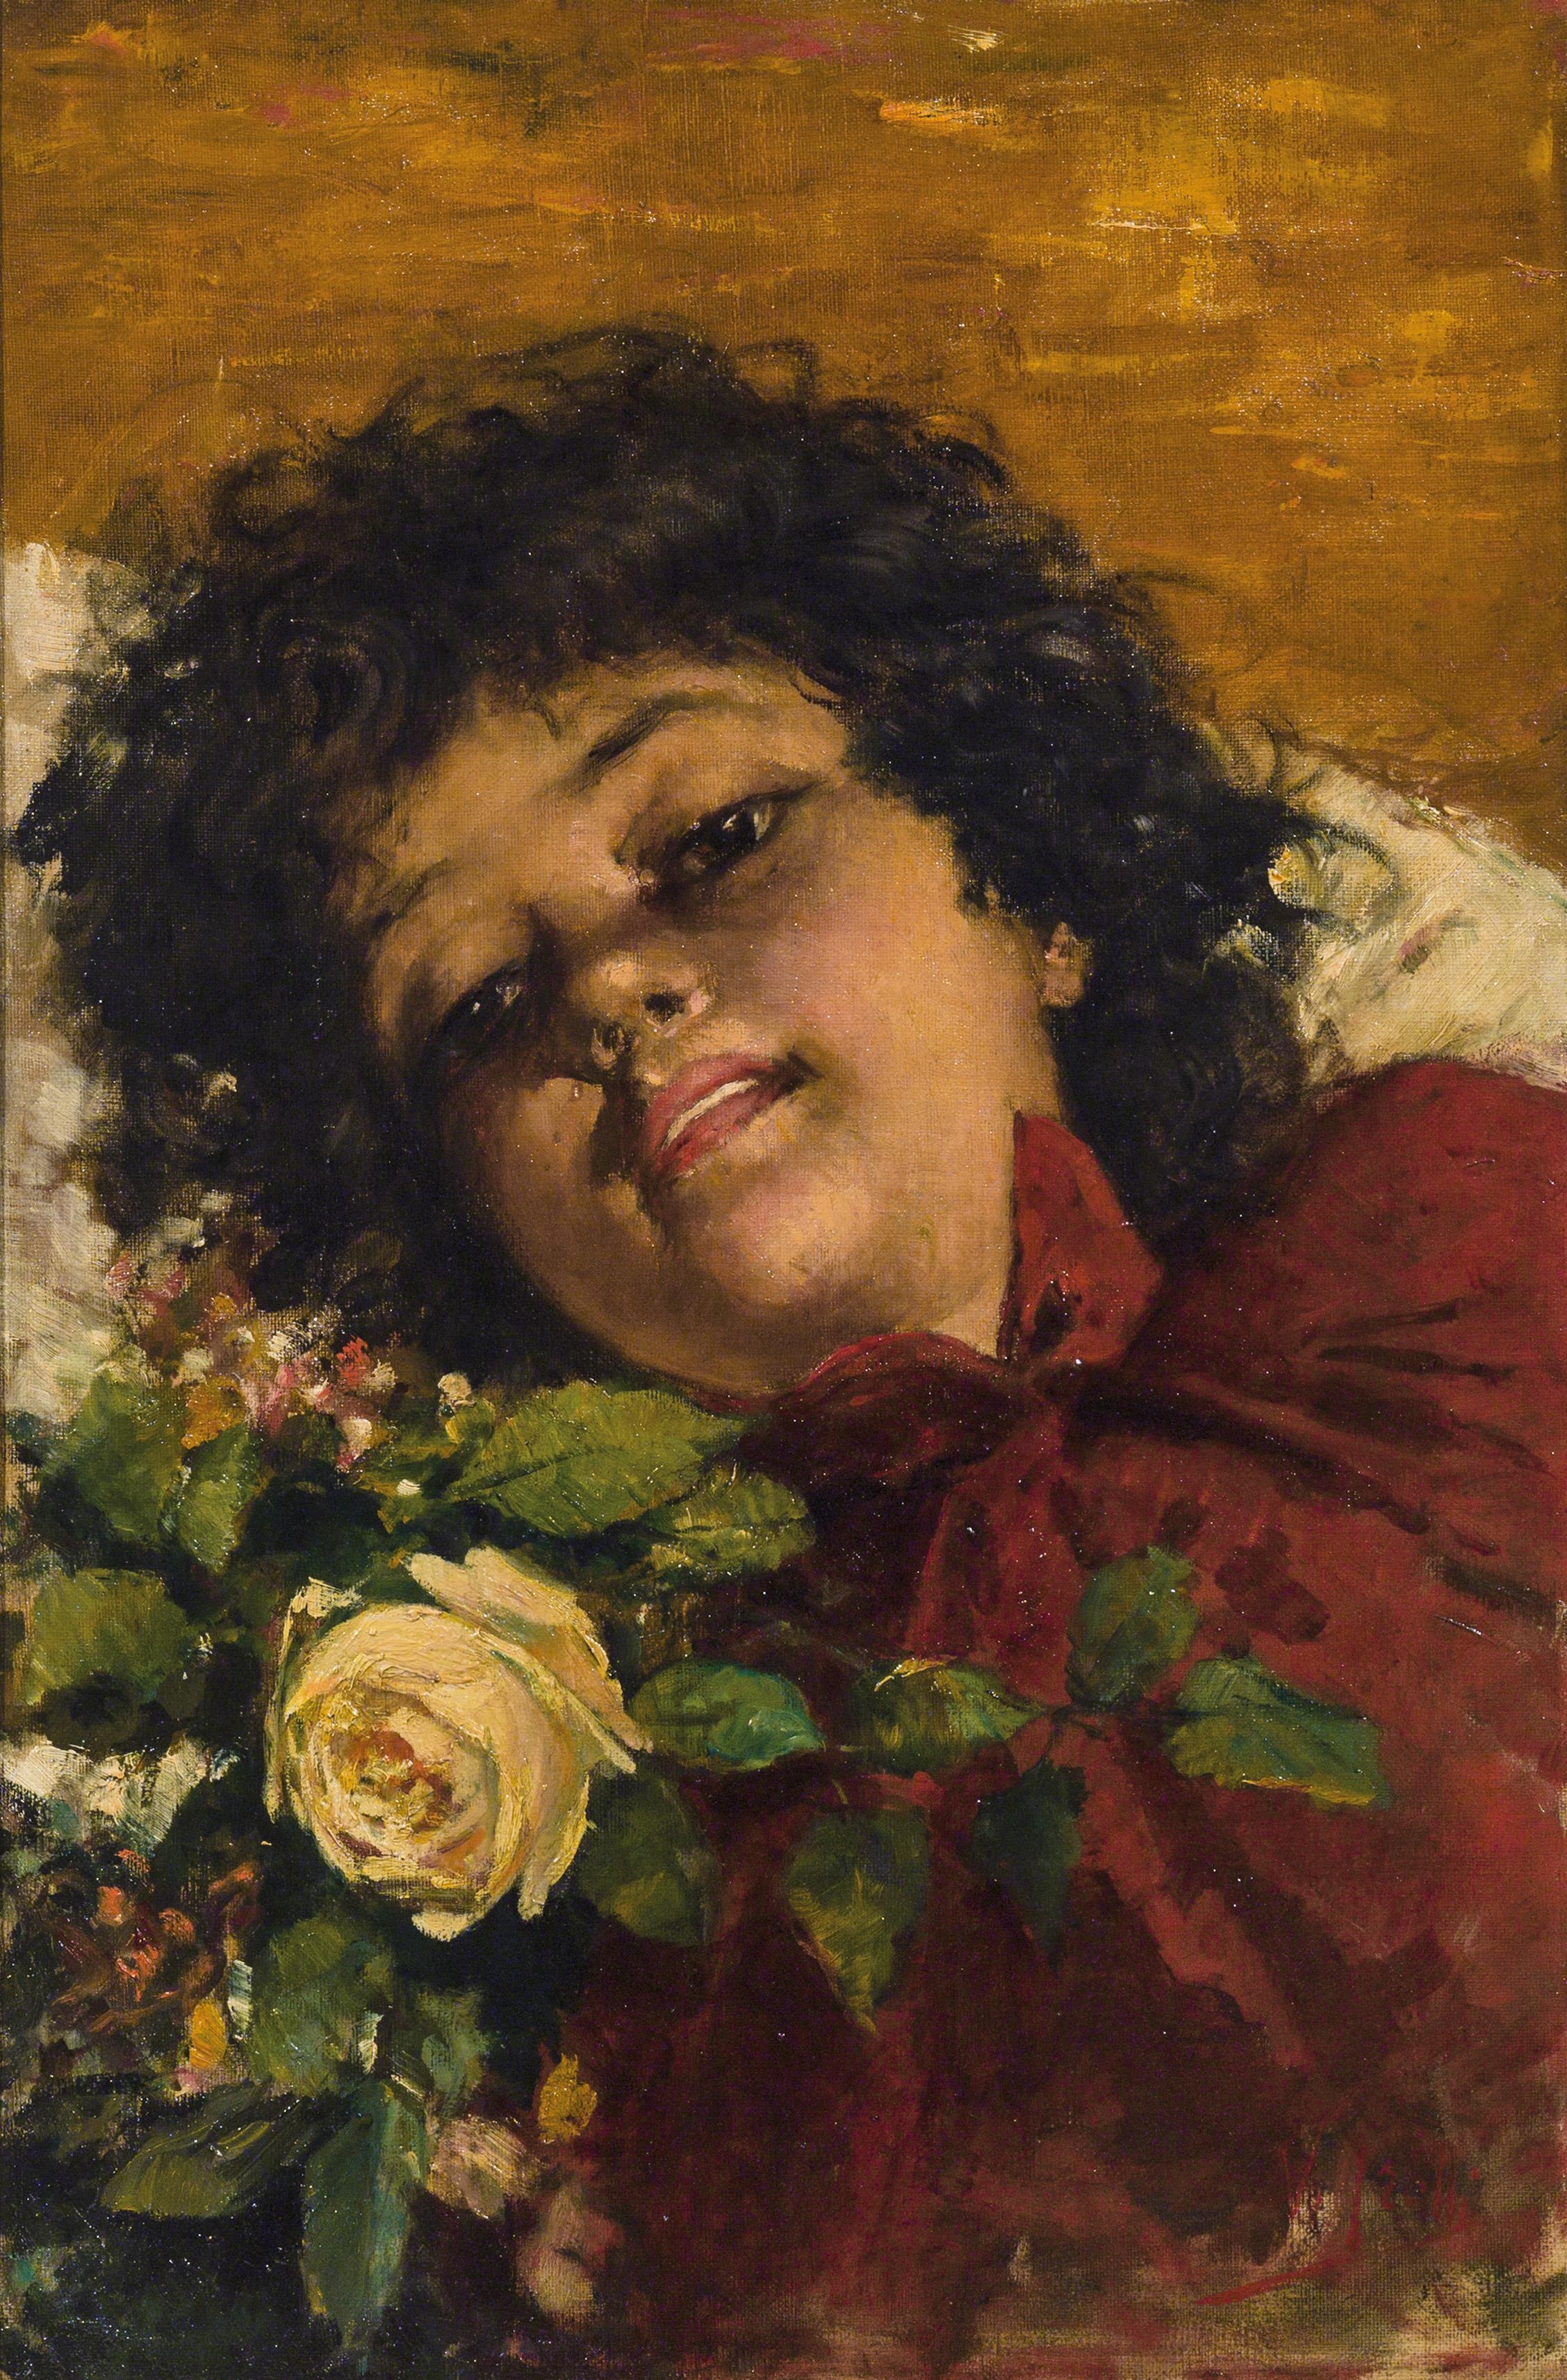 Fanciulla with Rose by Vincenzo Irolli